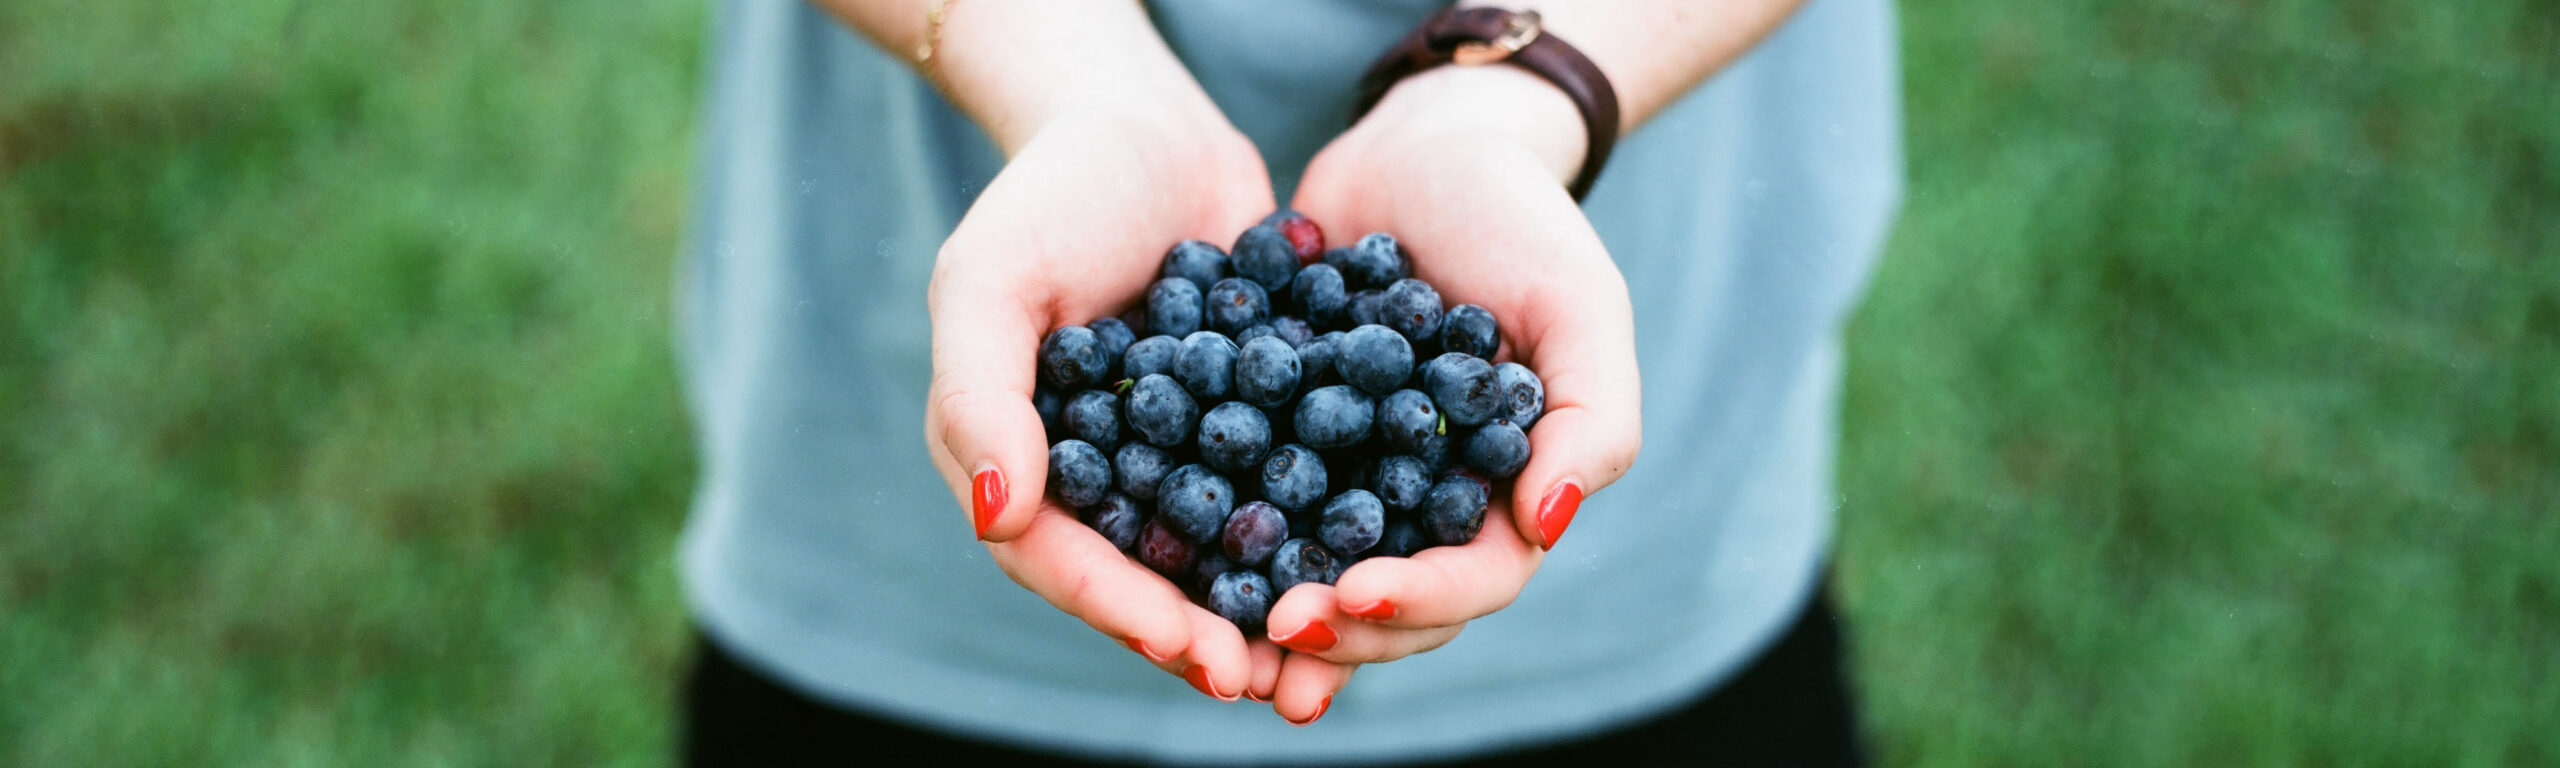 A woman holding two handfuls of blueberries.